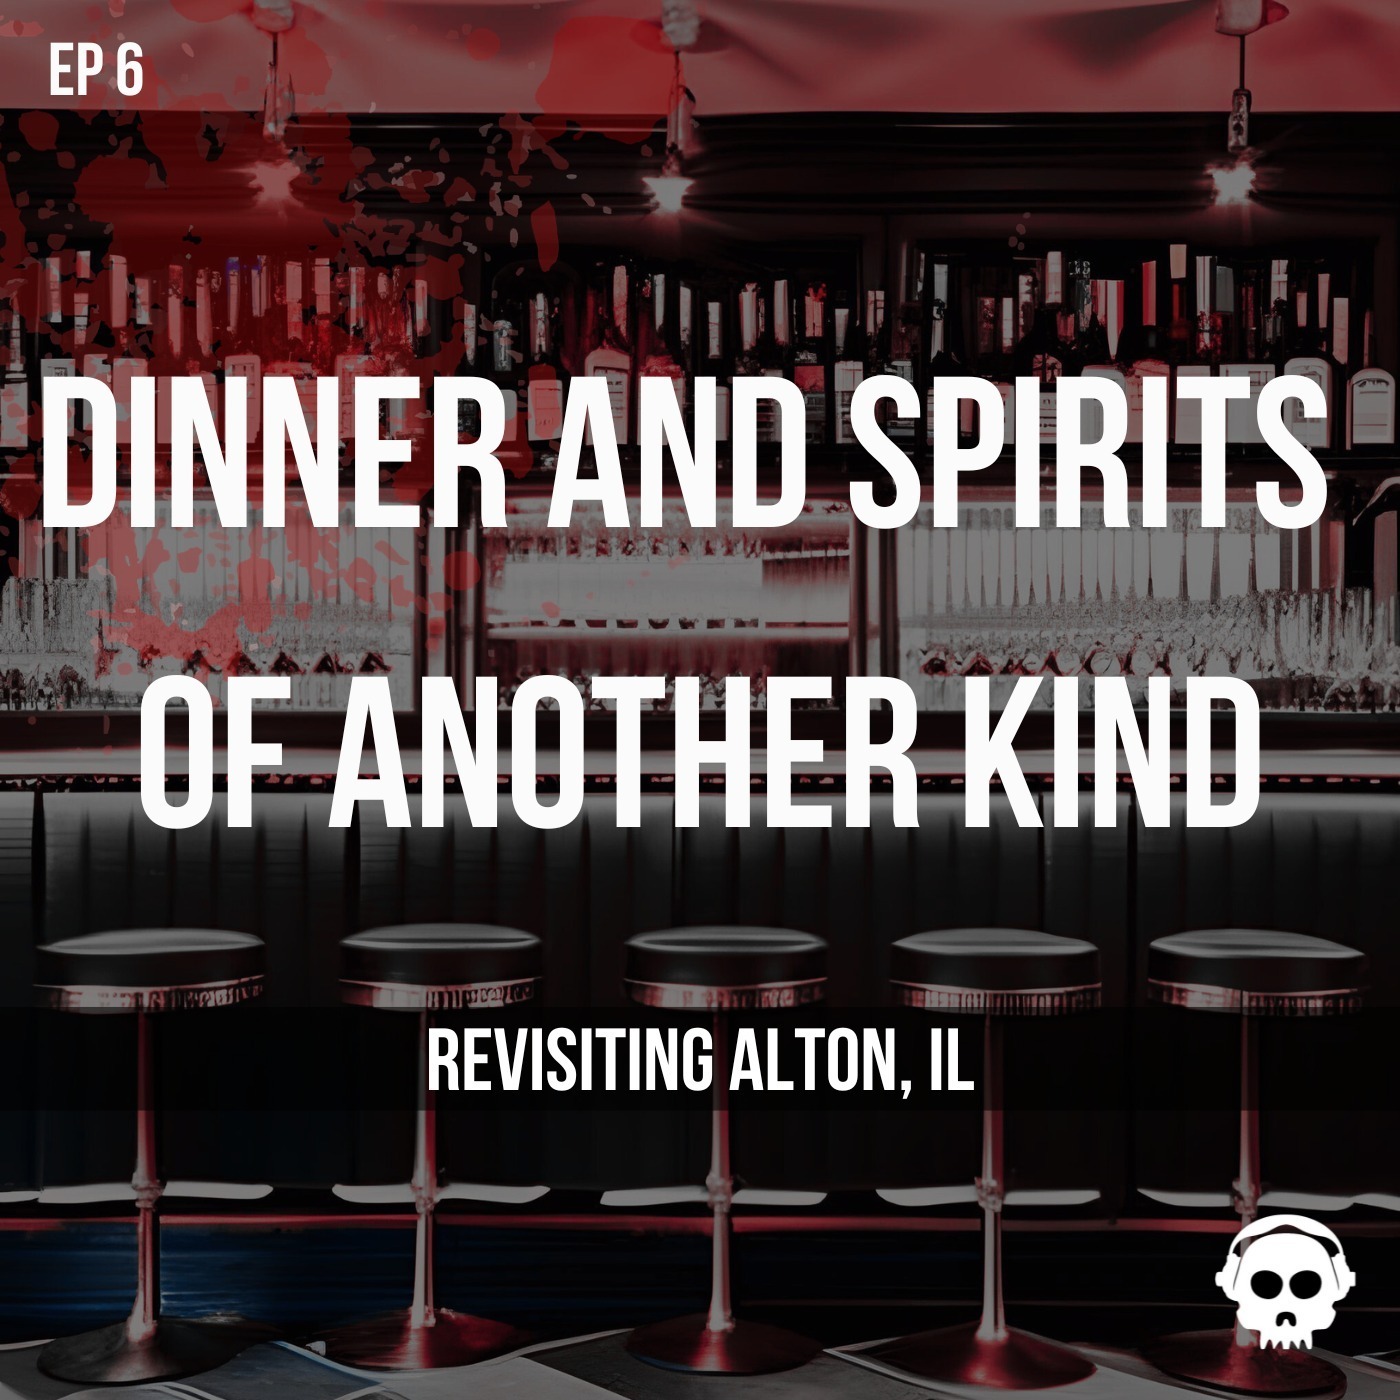 Dinner and Spirits of Another Kind (Revisiting Alton, IL)